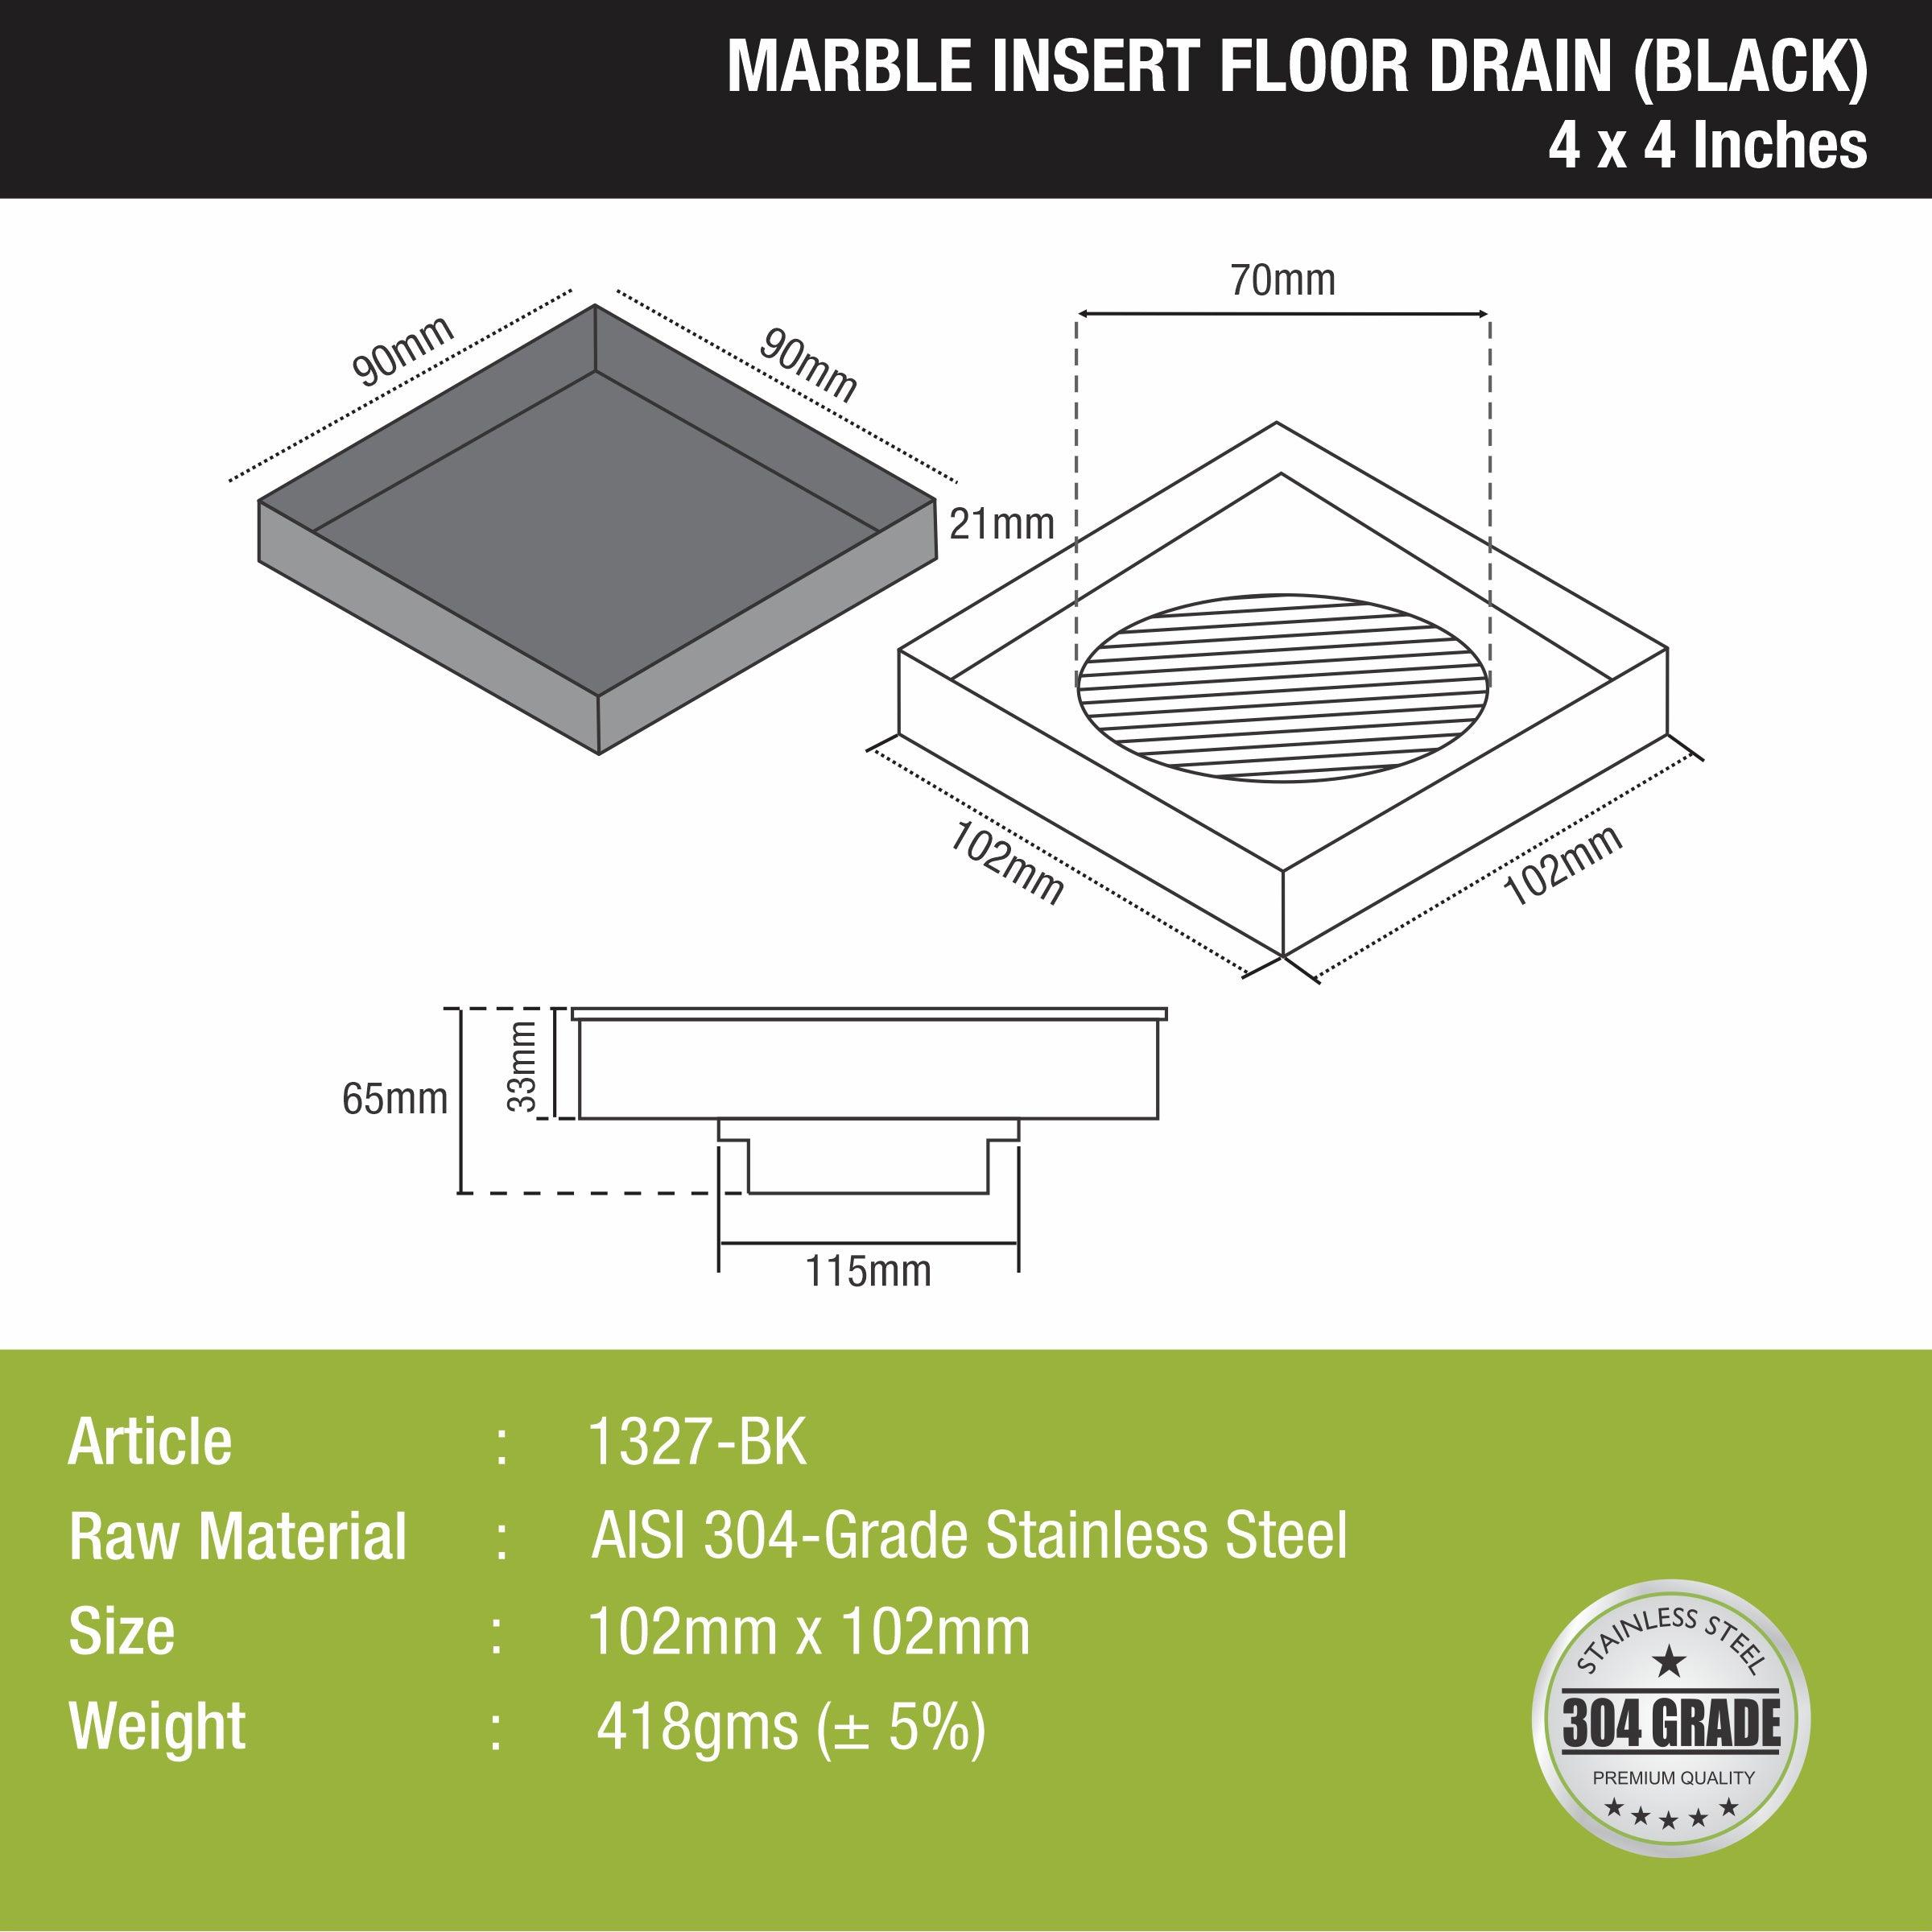 Marble Insert Square Floor Drain - Black (4 x 4 Inches)  size and measurement